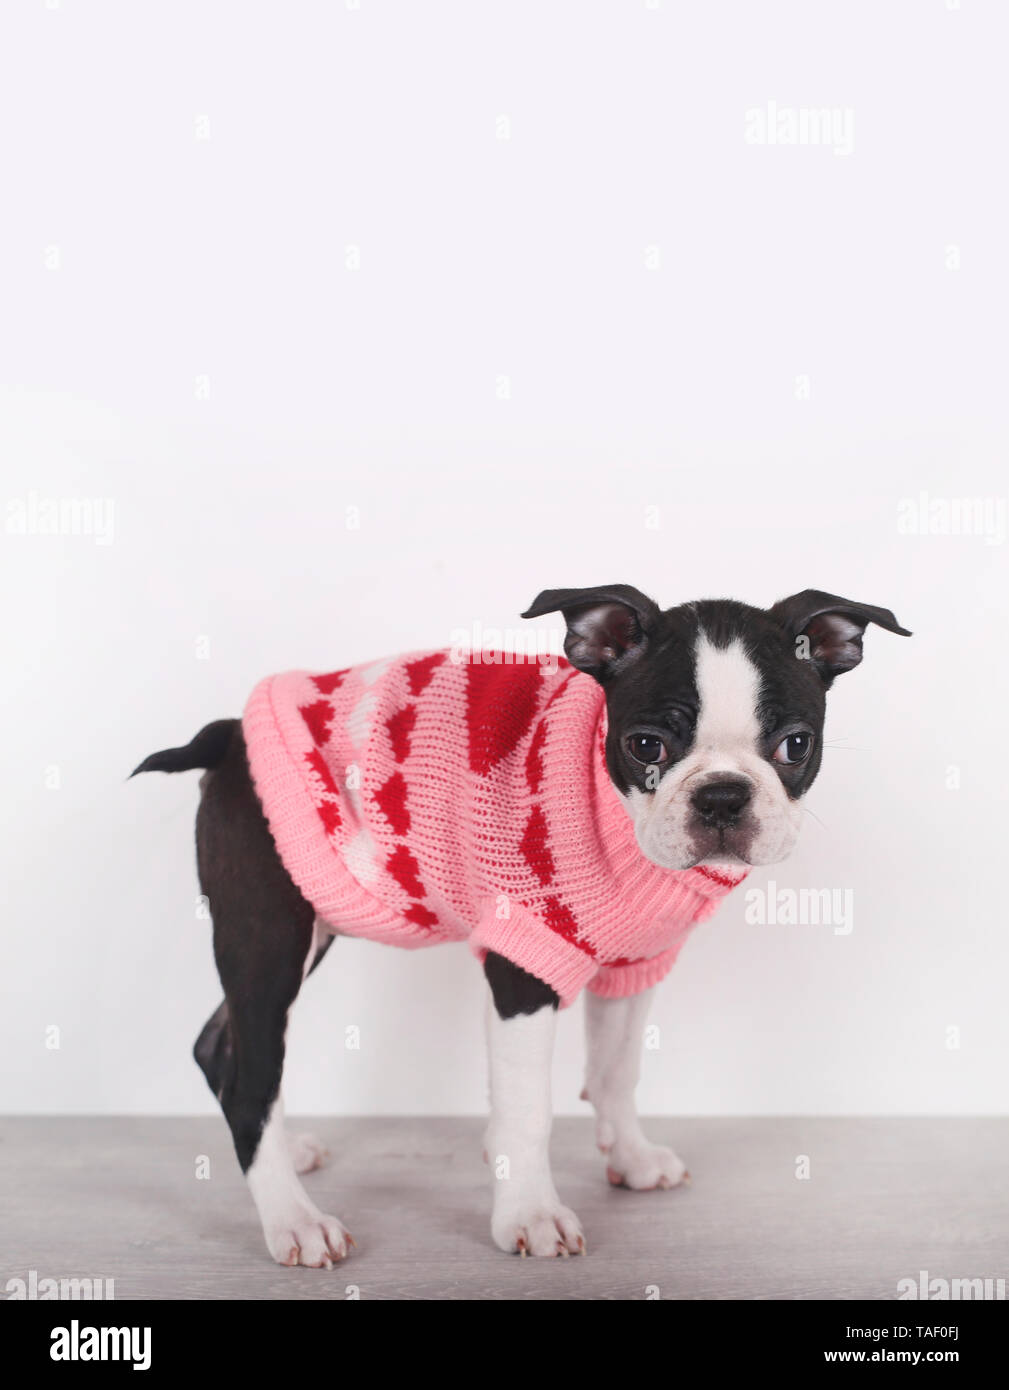 Portrait of Boston terrier puppy wearing pink pullover with hearts Stock Photo